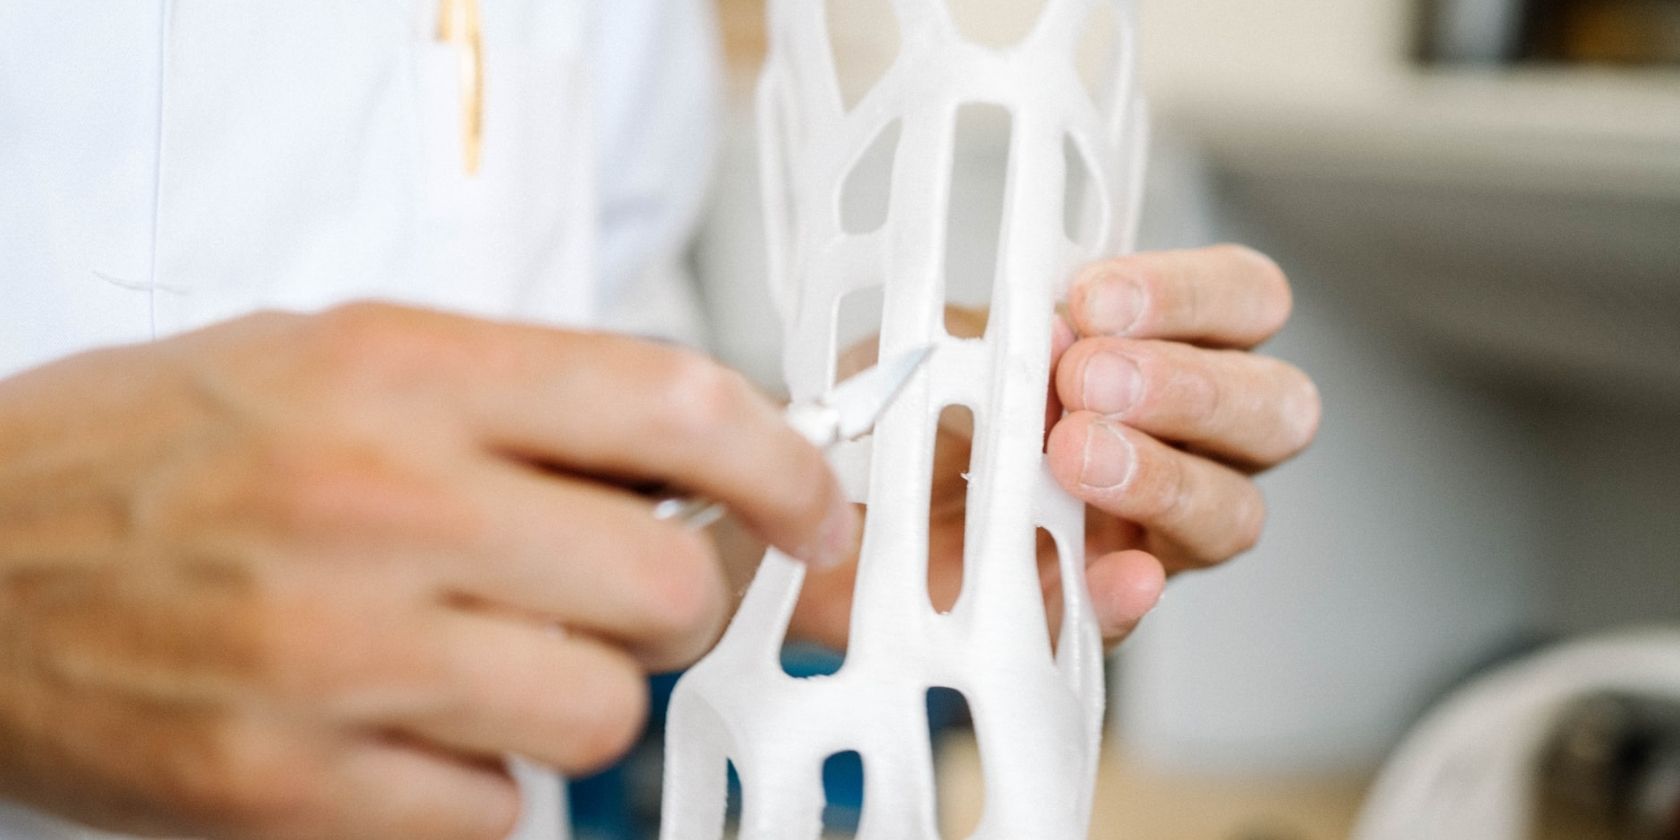 removing excess from a 3D printed splint